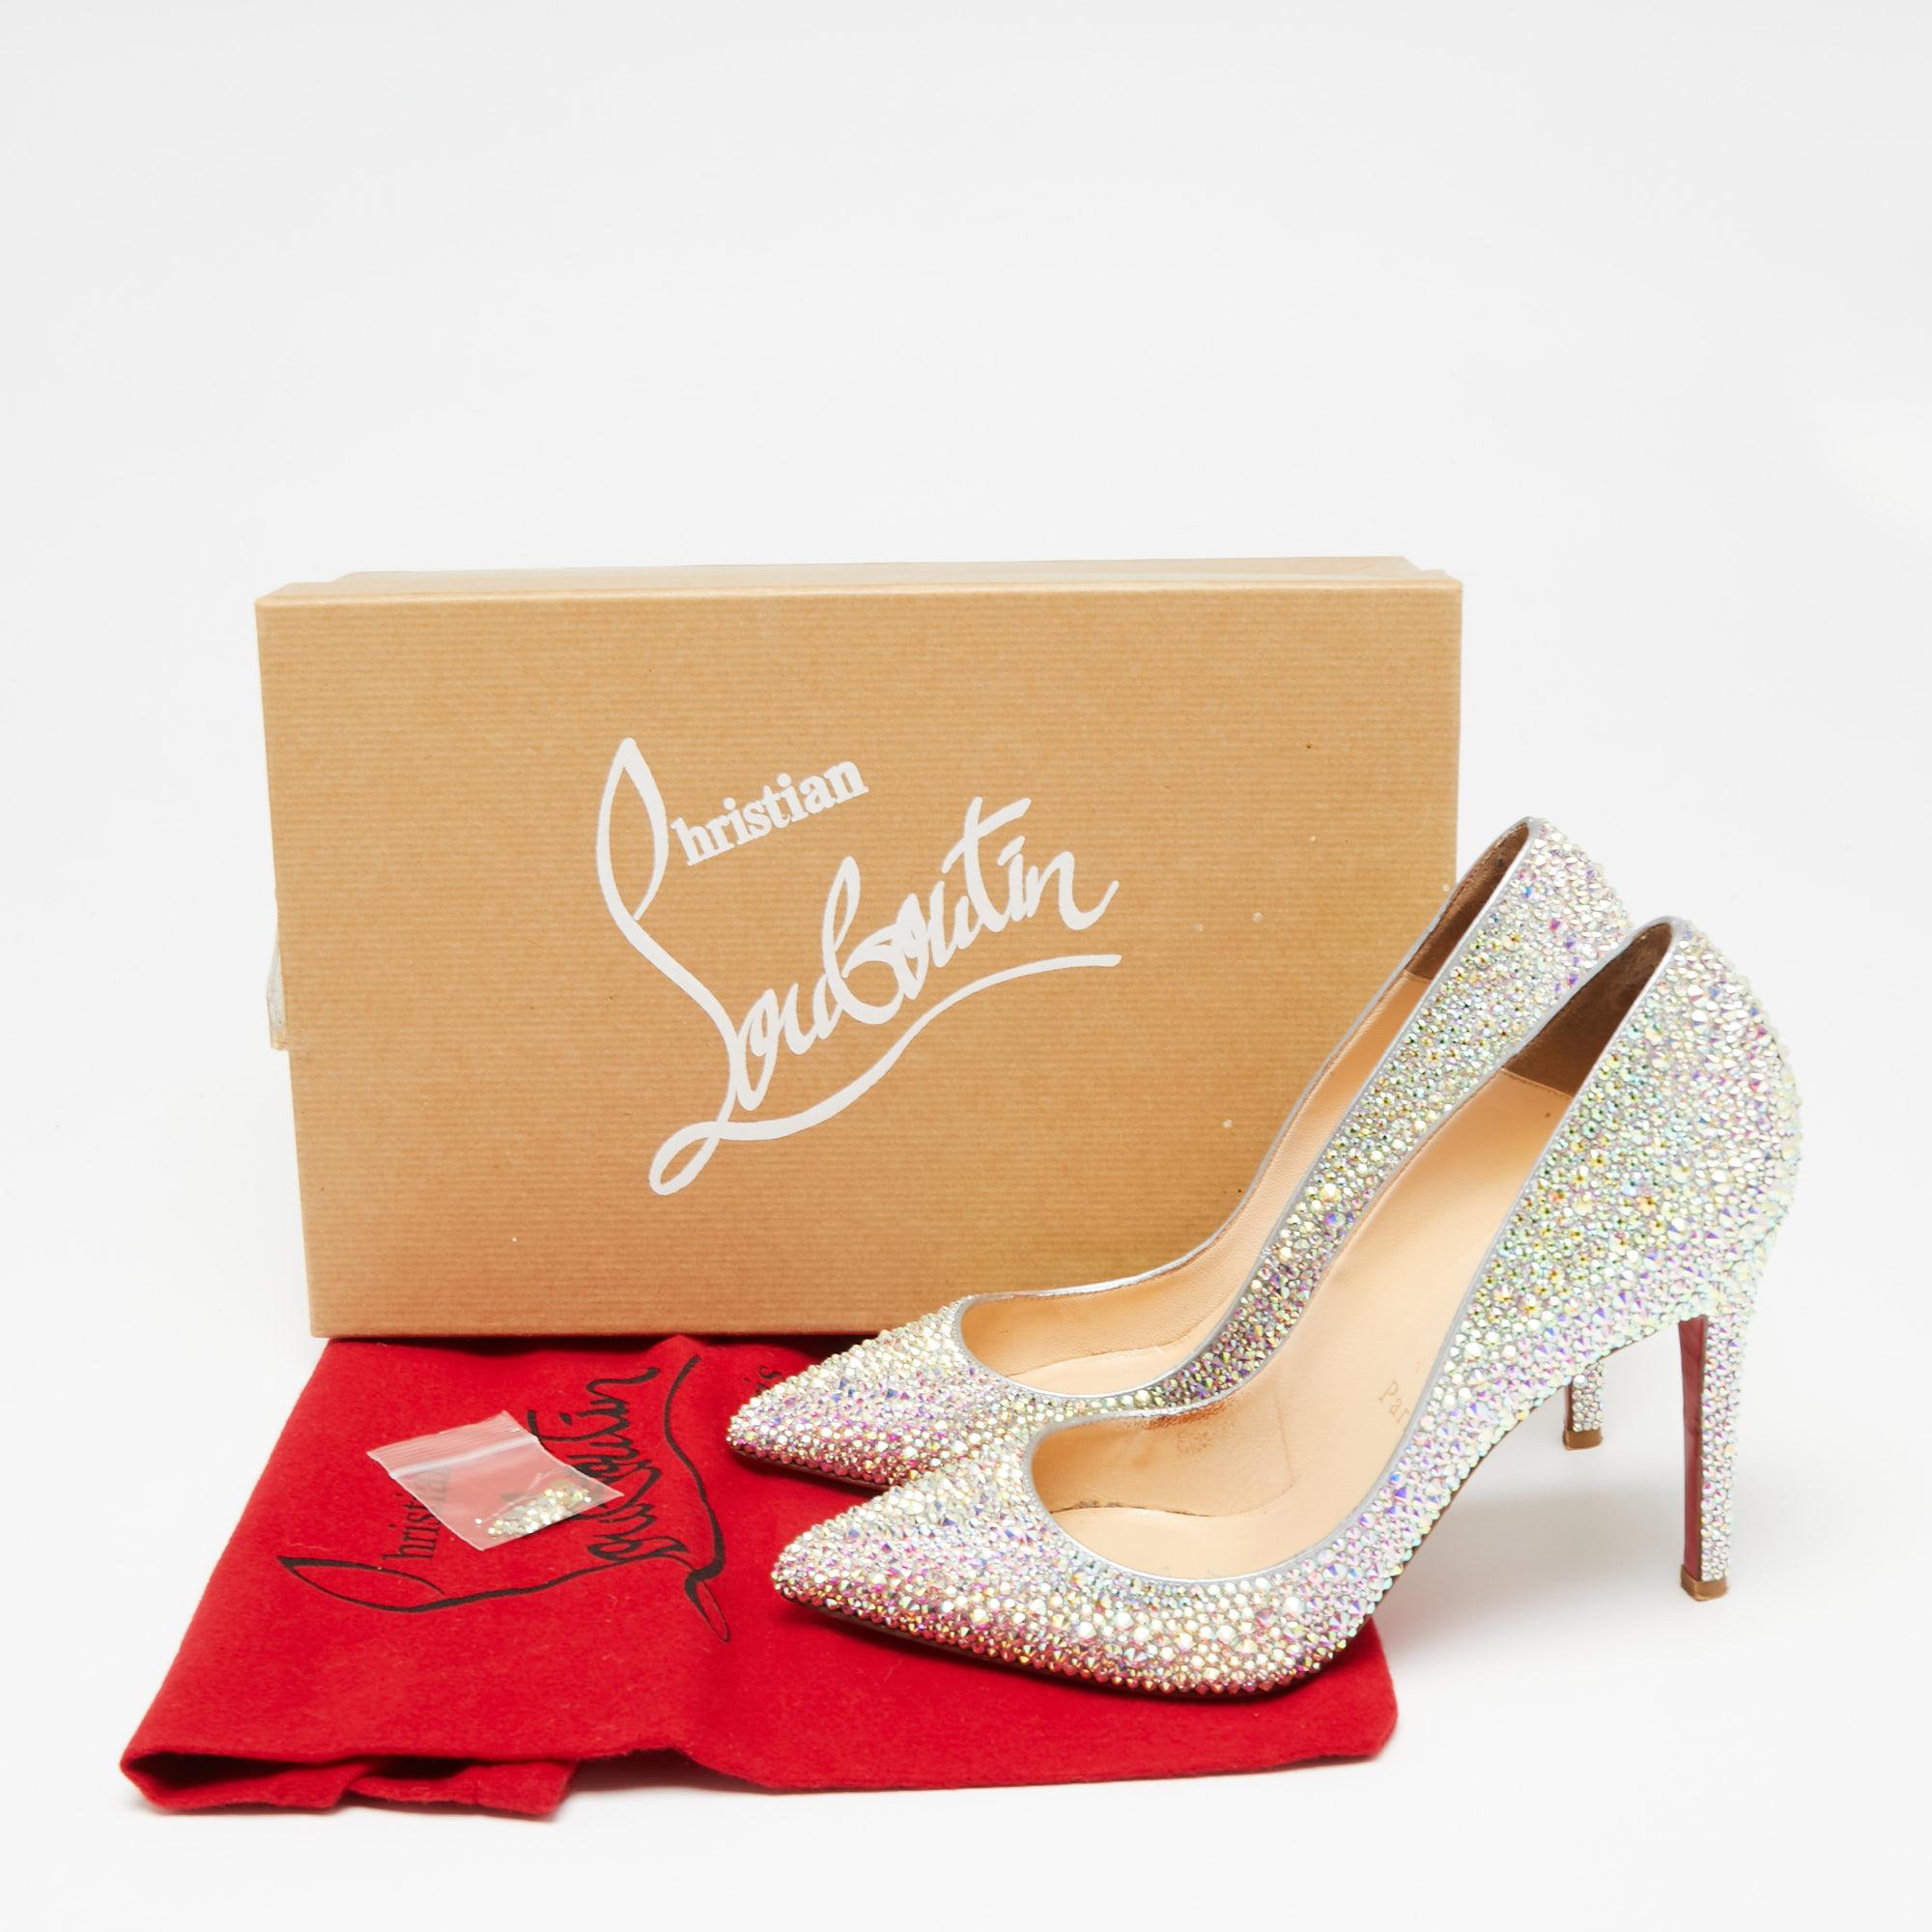 Christian Louboutin Multicolor Leather Pigalle Strass Degrade Pumps Size 36 1